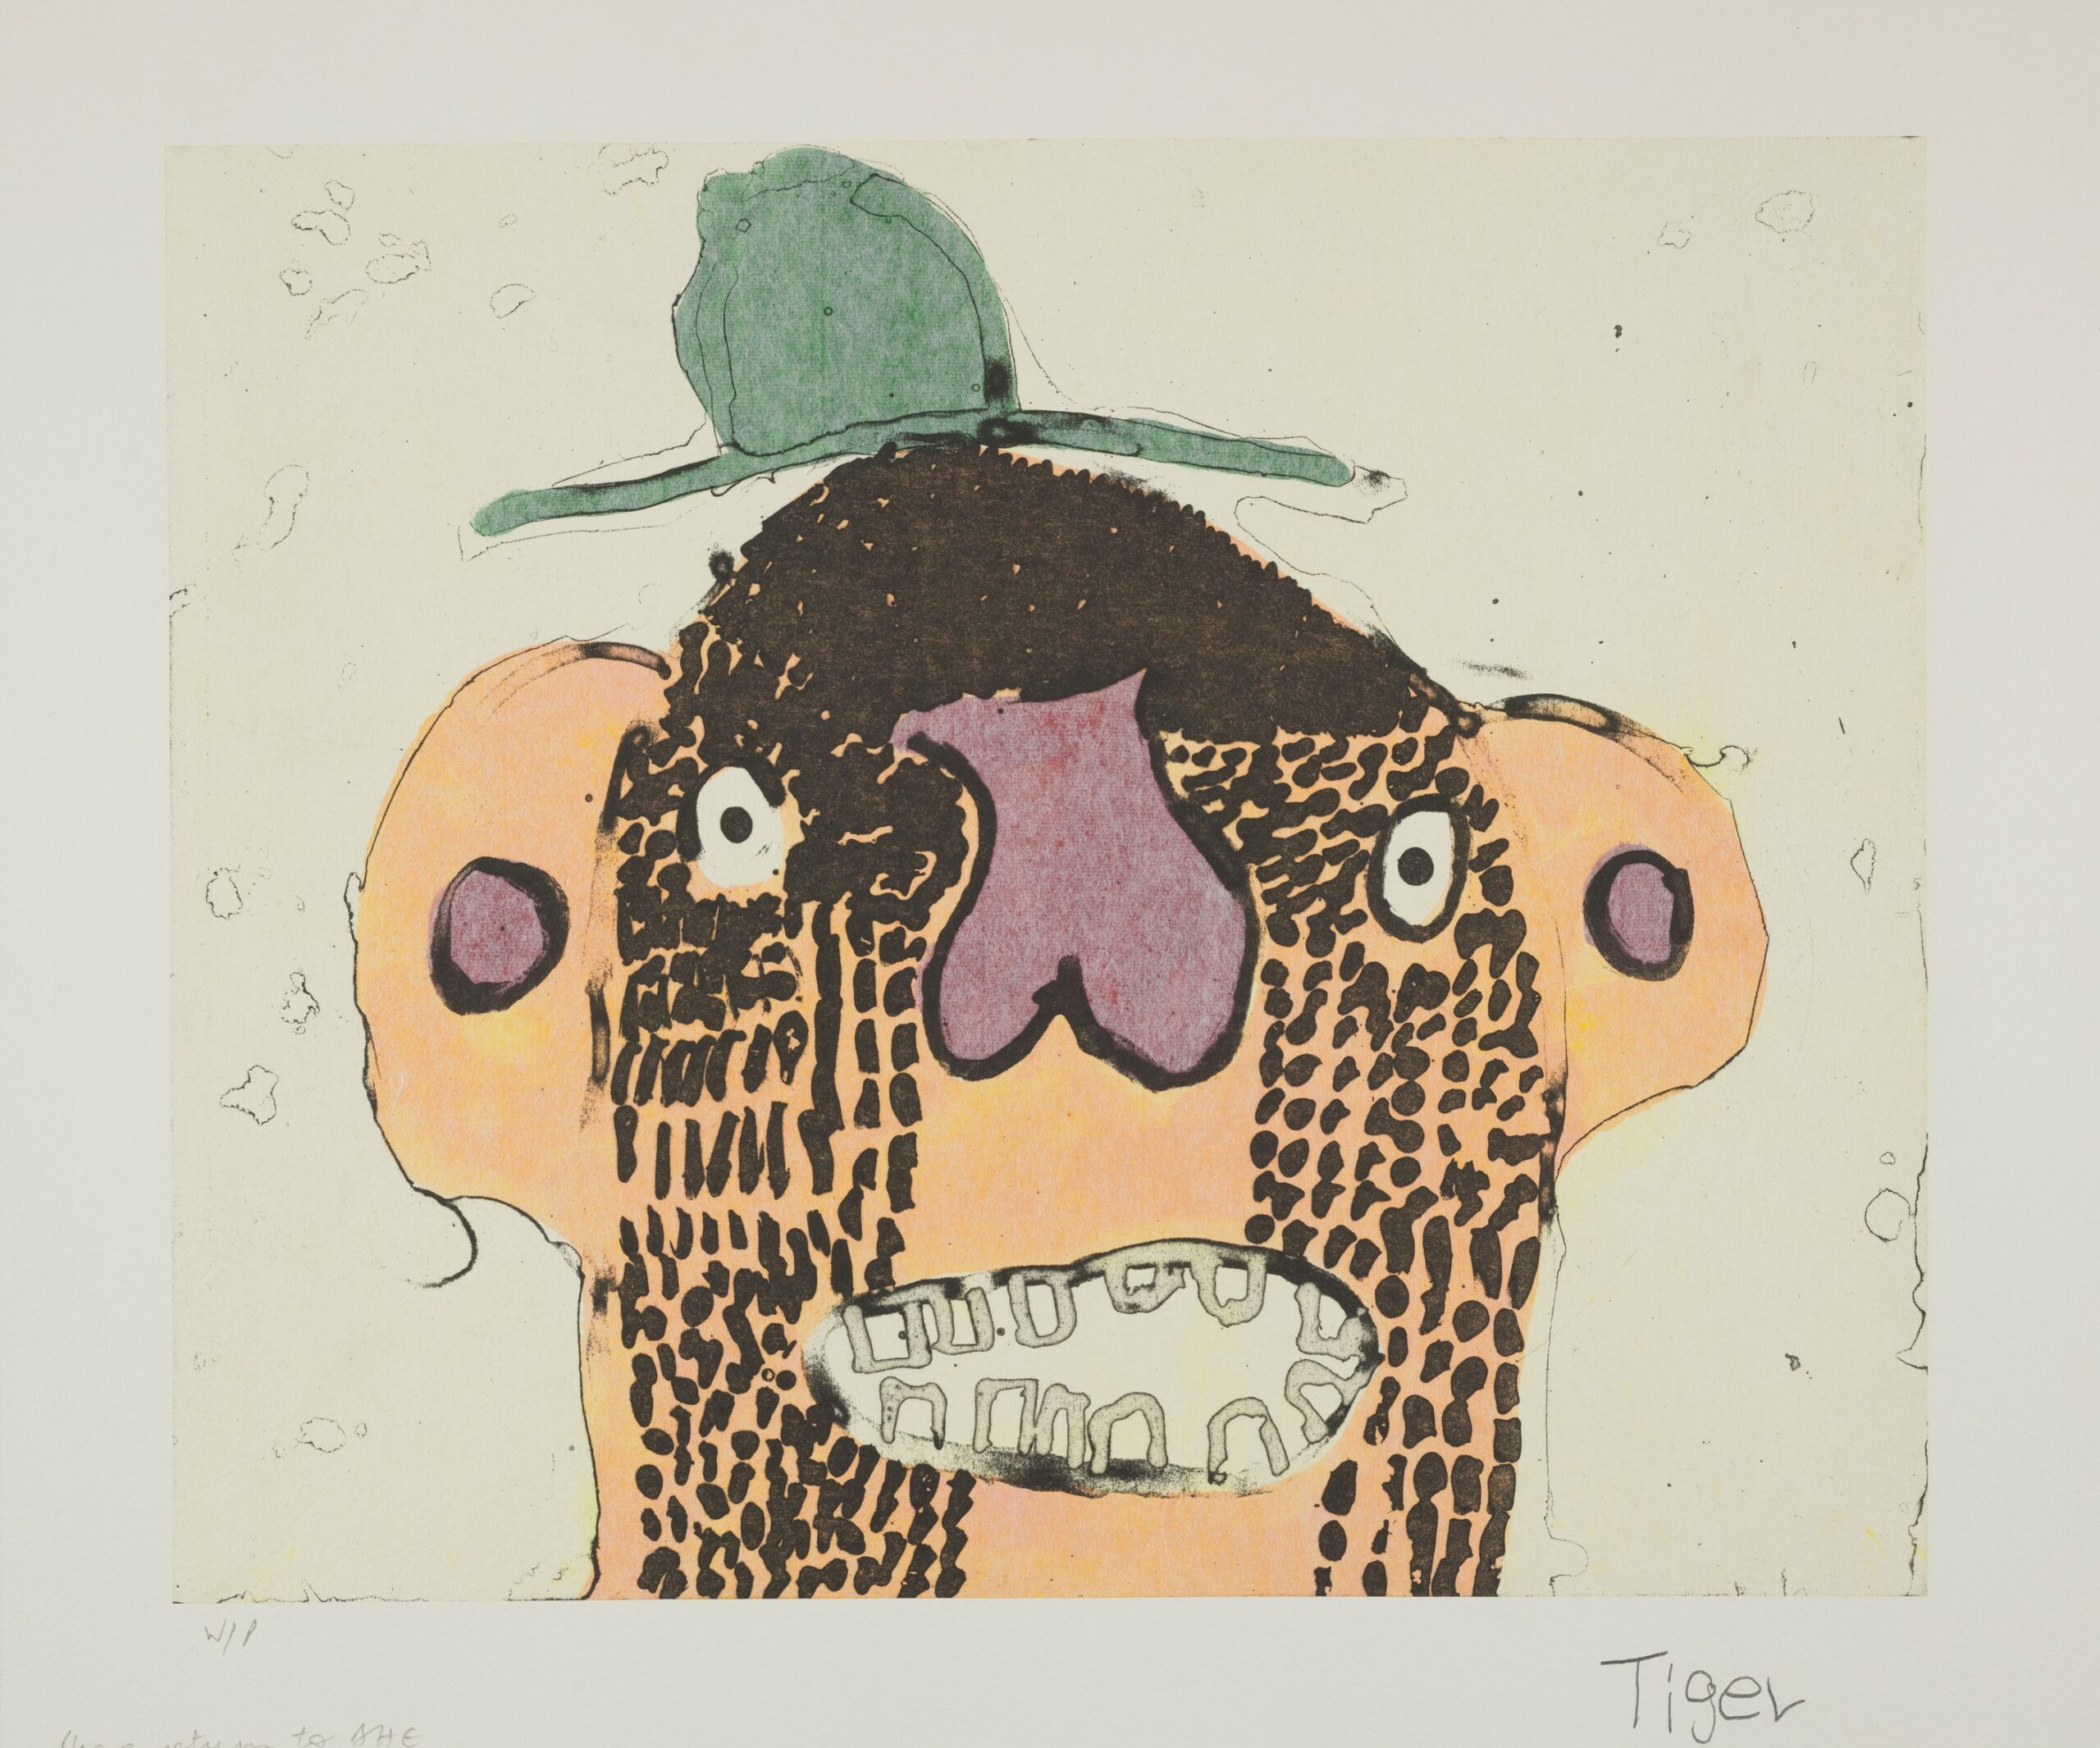 TIGER YALTANGKI, Malpa Wiru (Good Friends), 2015, etching with chine collé on Hahnemühle paper, printer: Basil Hall. Kluge-Ruhe Aboriginal Art Collection of the University of Virginia, gift of Basil Hall, 2023.0006.029.001. Courtesy of the artist, Iwantja Arts, and Alcaston Gallery.